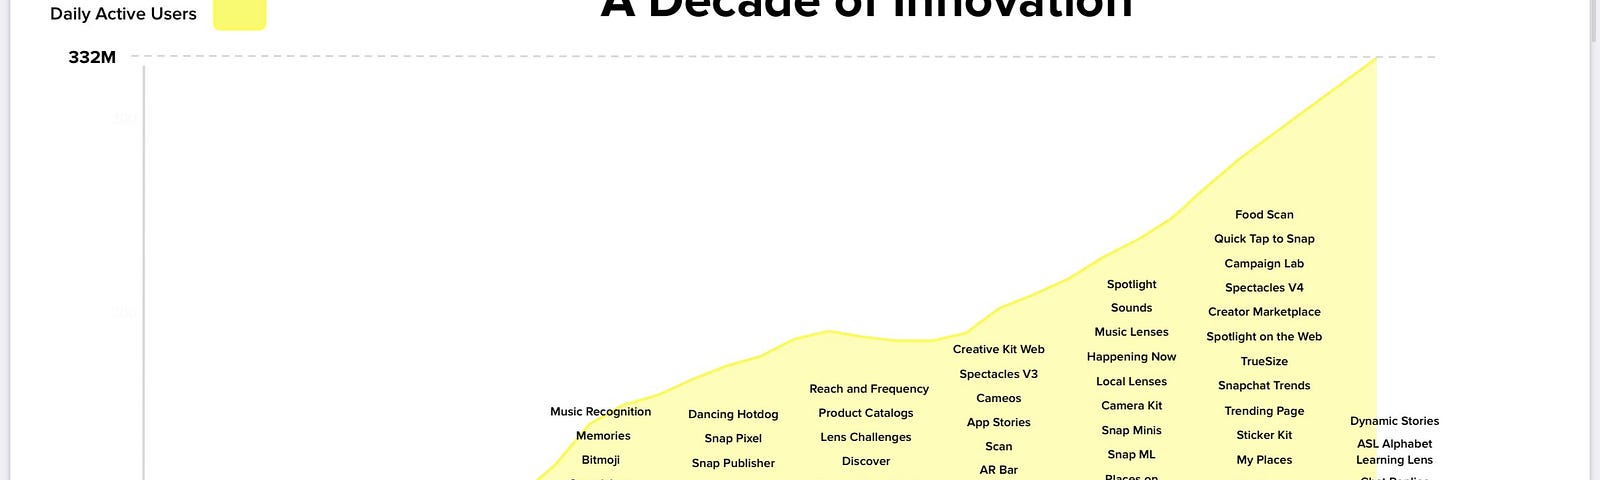 IMAGE: A graph from Snap depicting all the product innovations they have come up with across the years